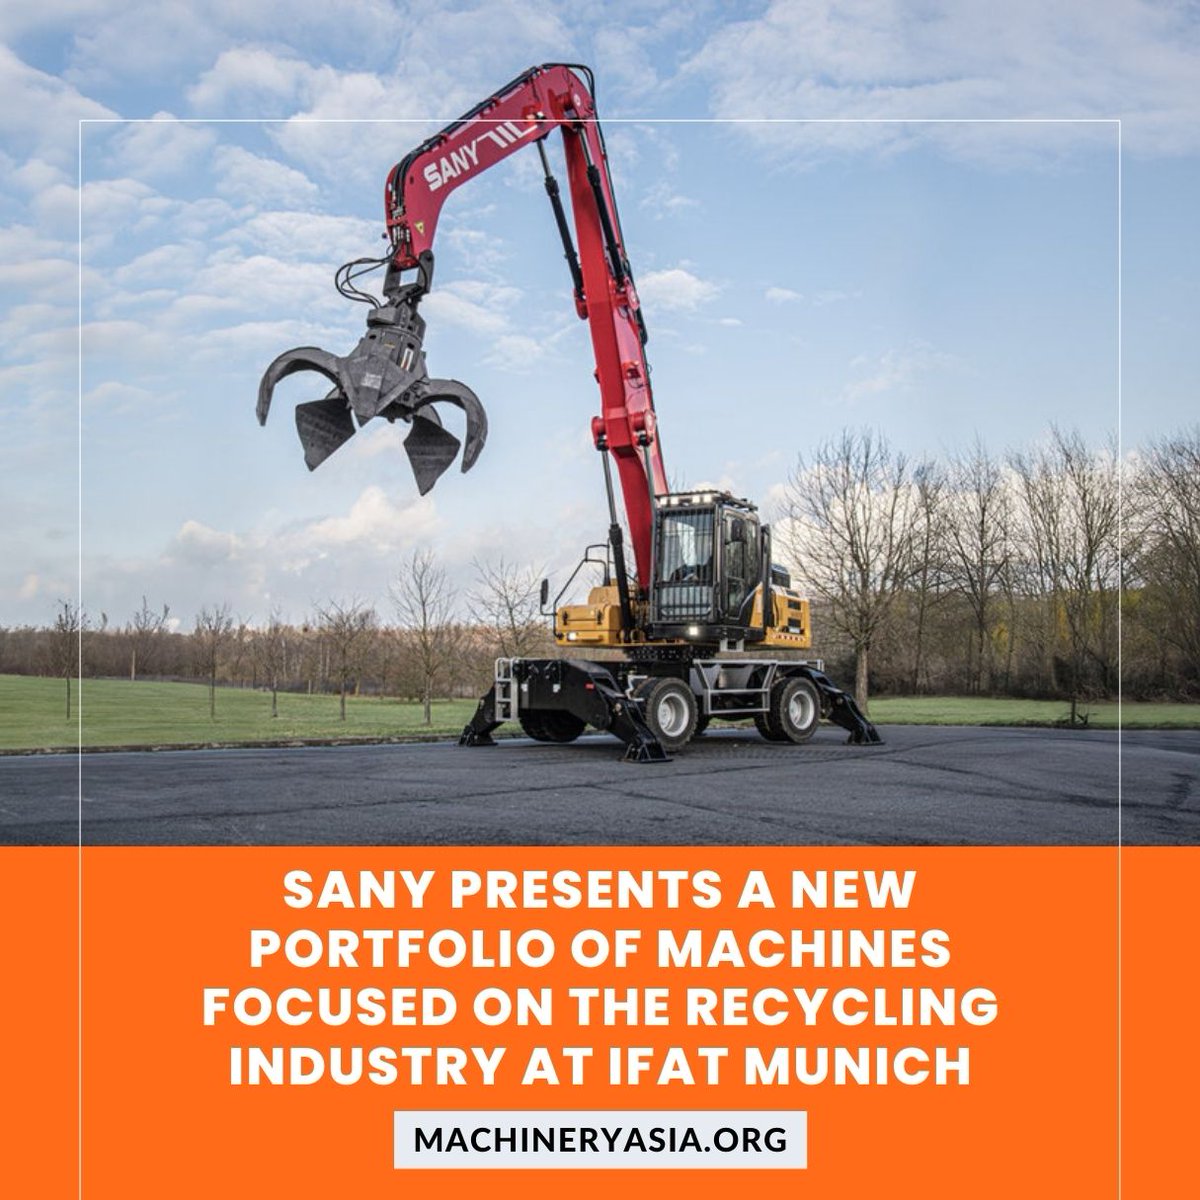 The new SANY SMHW30G5 wheeled material handler features a high load capacity combined with a large reach.

Learn more: machineryasia.org/sany-presents-…

#constructionmachinery #construction #constructionequipment #heavymachinery #heavyequipment #excavator #earthmoving #heavyequipmentlife